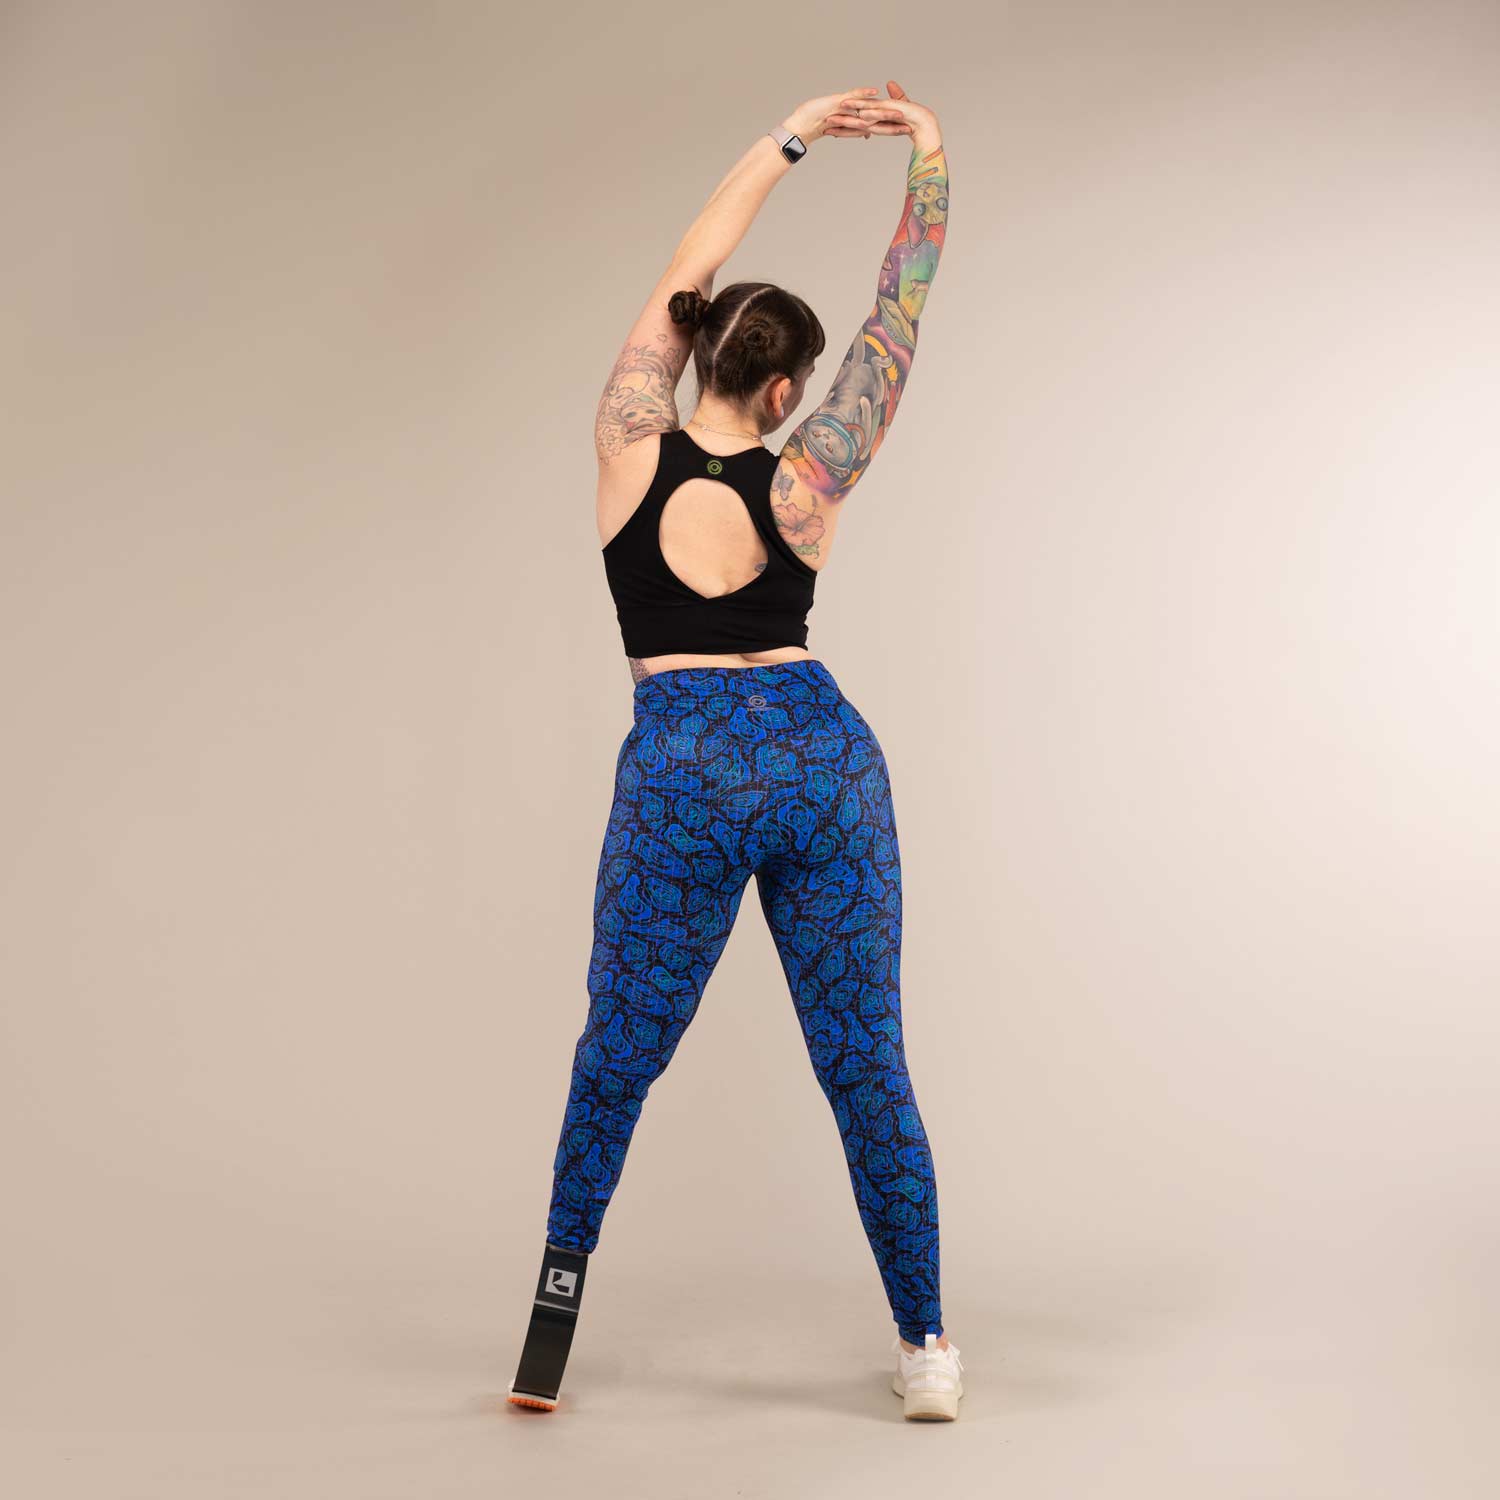 TITAN GEO JAGUAR LEGGINGS | Printed Recycled Leggings | 3RD ROCK Clothing -  Laura is 5ft 6 with a 31.5" waist, 43" hips and wears a size 14 F